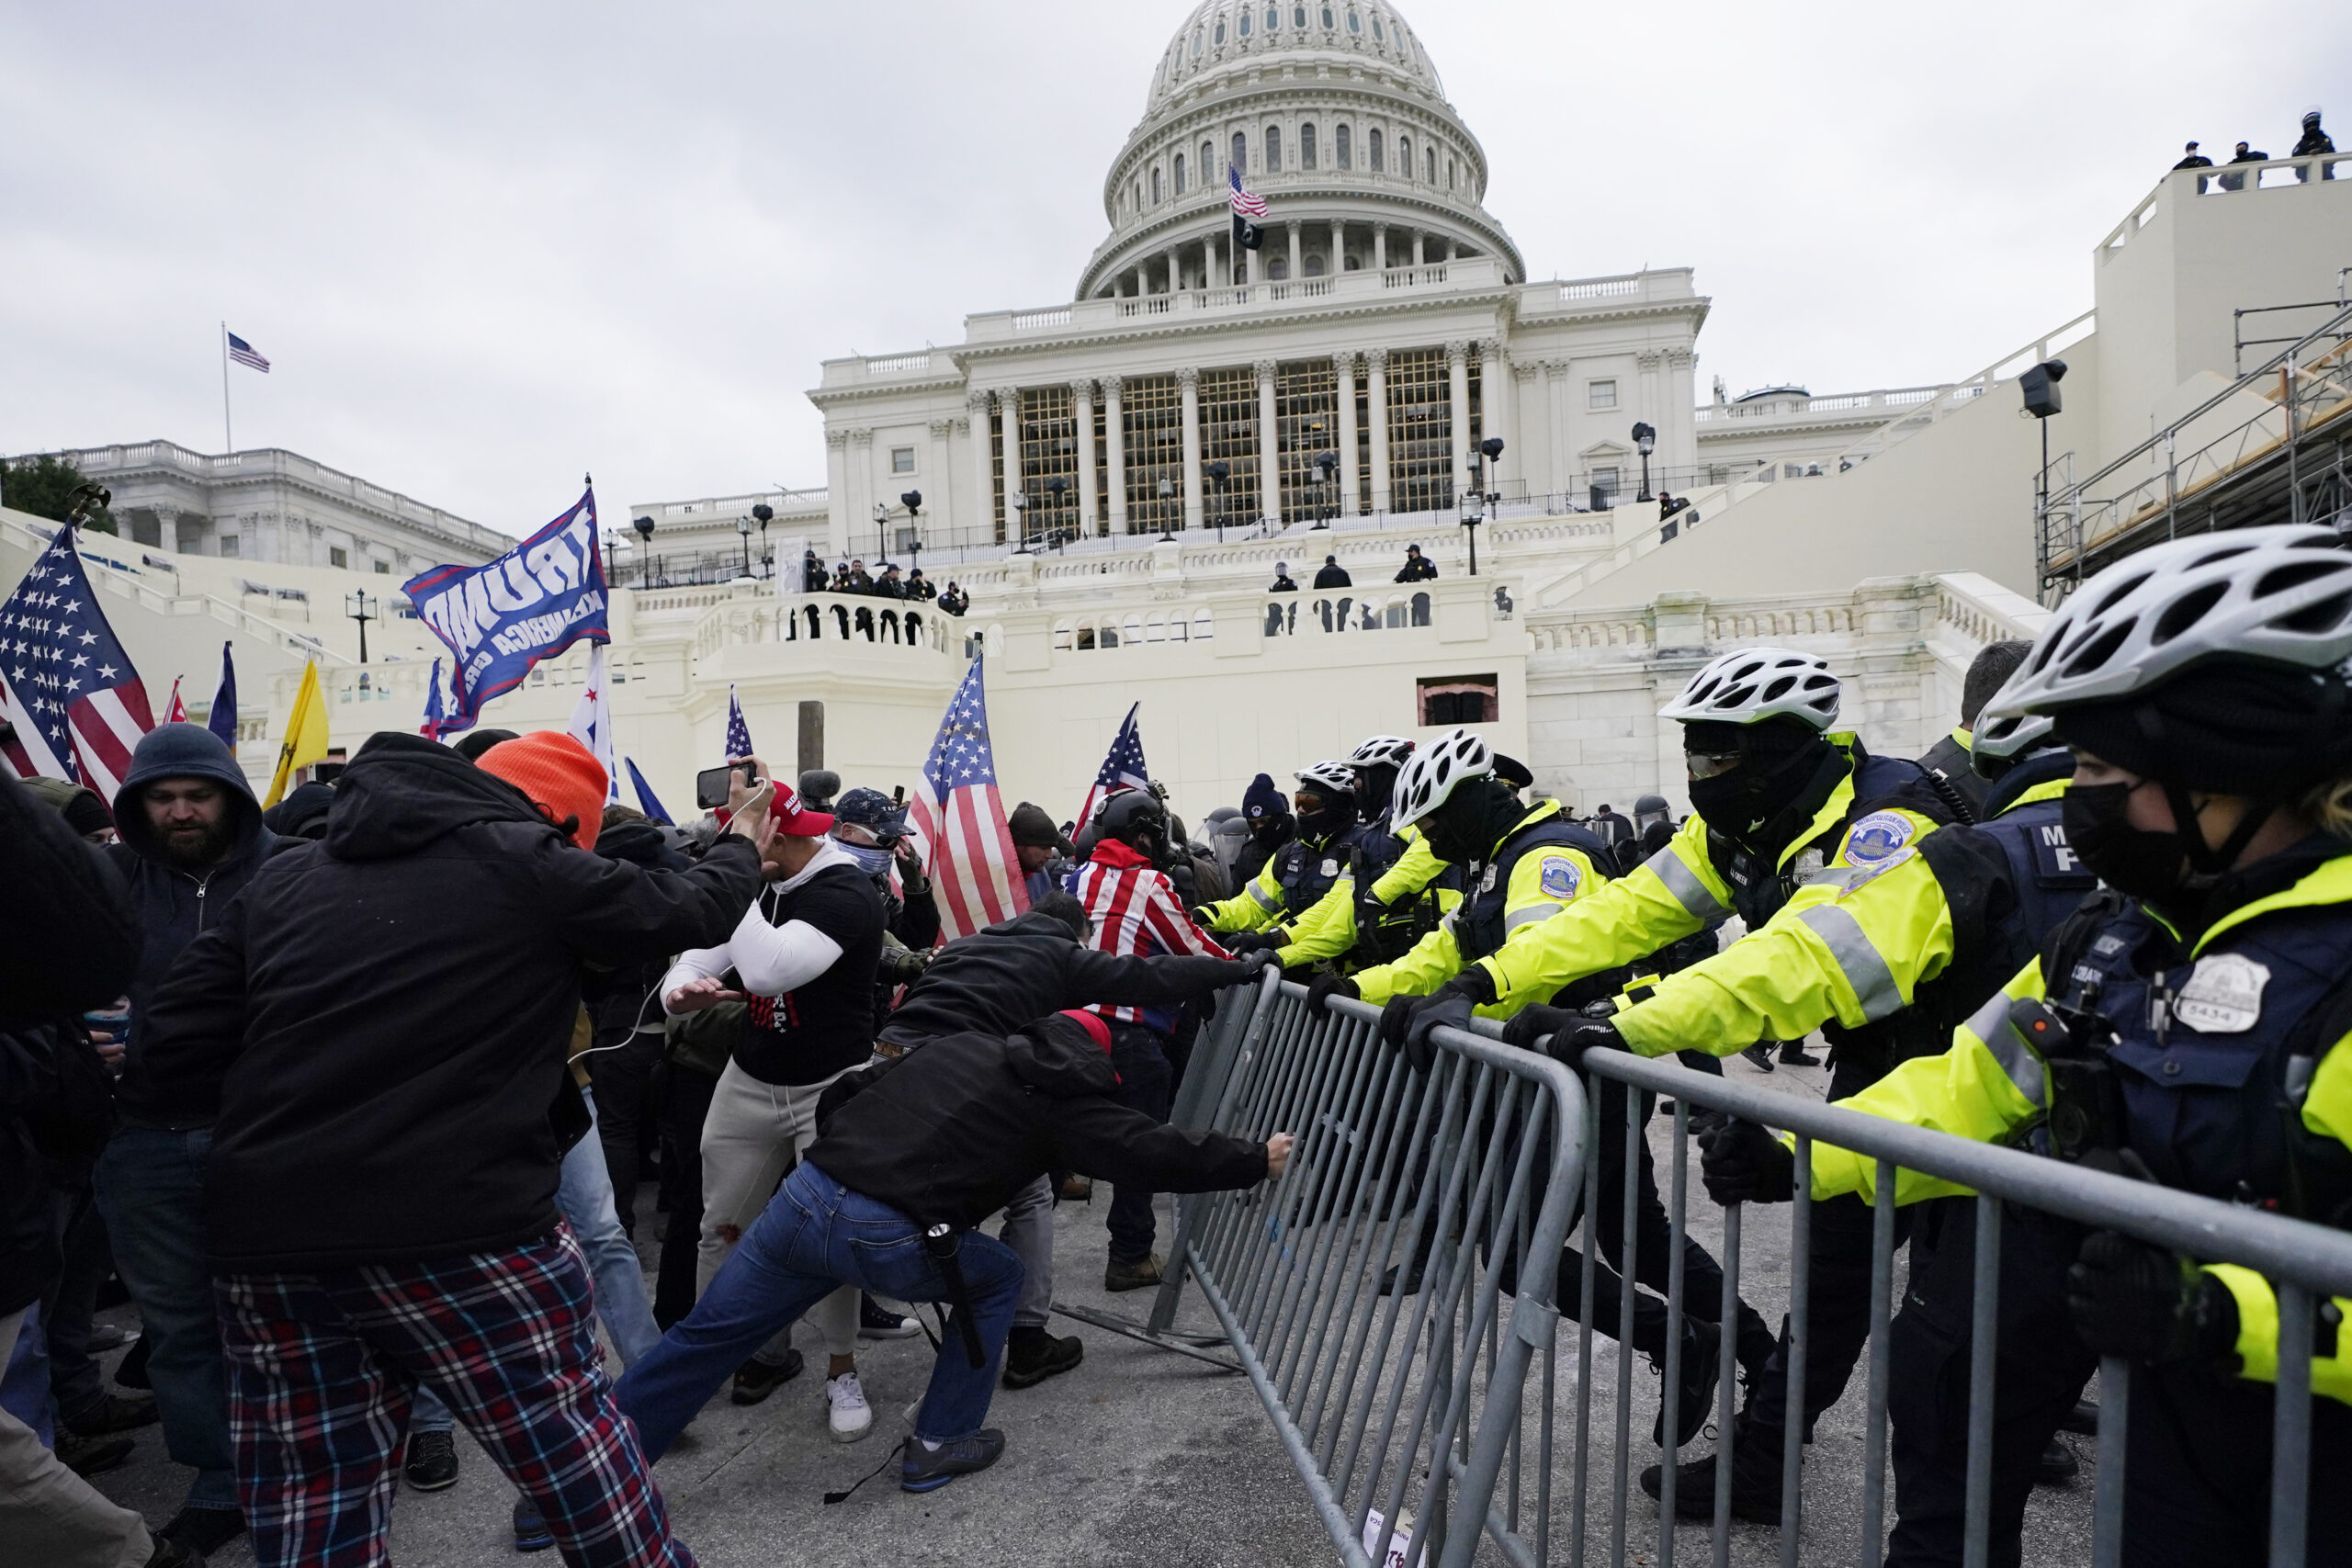 FILE - In this Jan. 6, 2021 file photo, supporters loyal to then-President Donald Trump, try to break through a police barrier at the Capitol in Washington. Key figures in the Jan. 6 riot on U.S. Capitol spoke about their desire to overthrow the government, but to date, U.S prosecutors have charged no one with sedition. They could still add them. But prosecutors may be reluctant to bring them because of their legal complexity and the difficulty in securing convictions. (AP Photo/Julio Cortez)